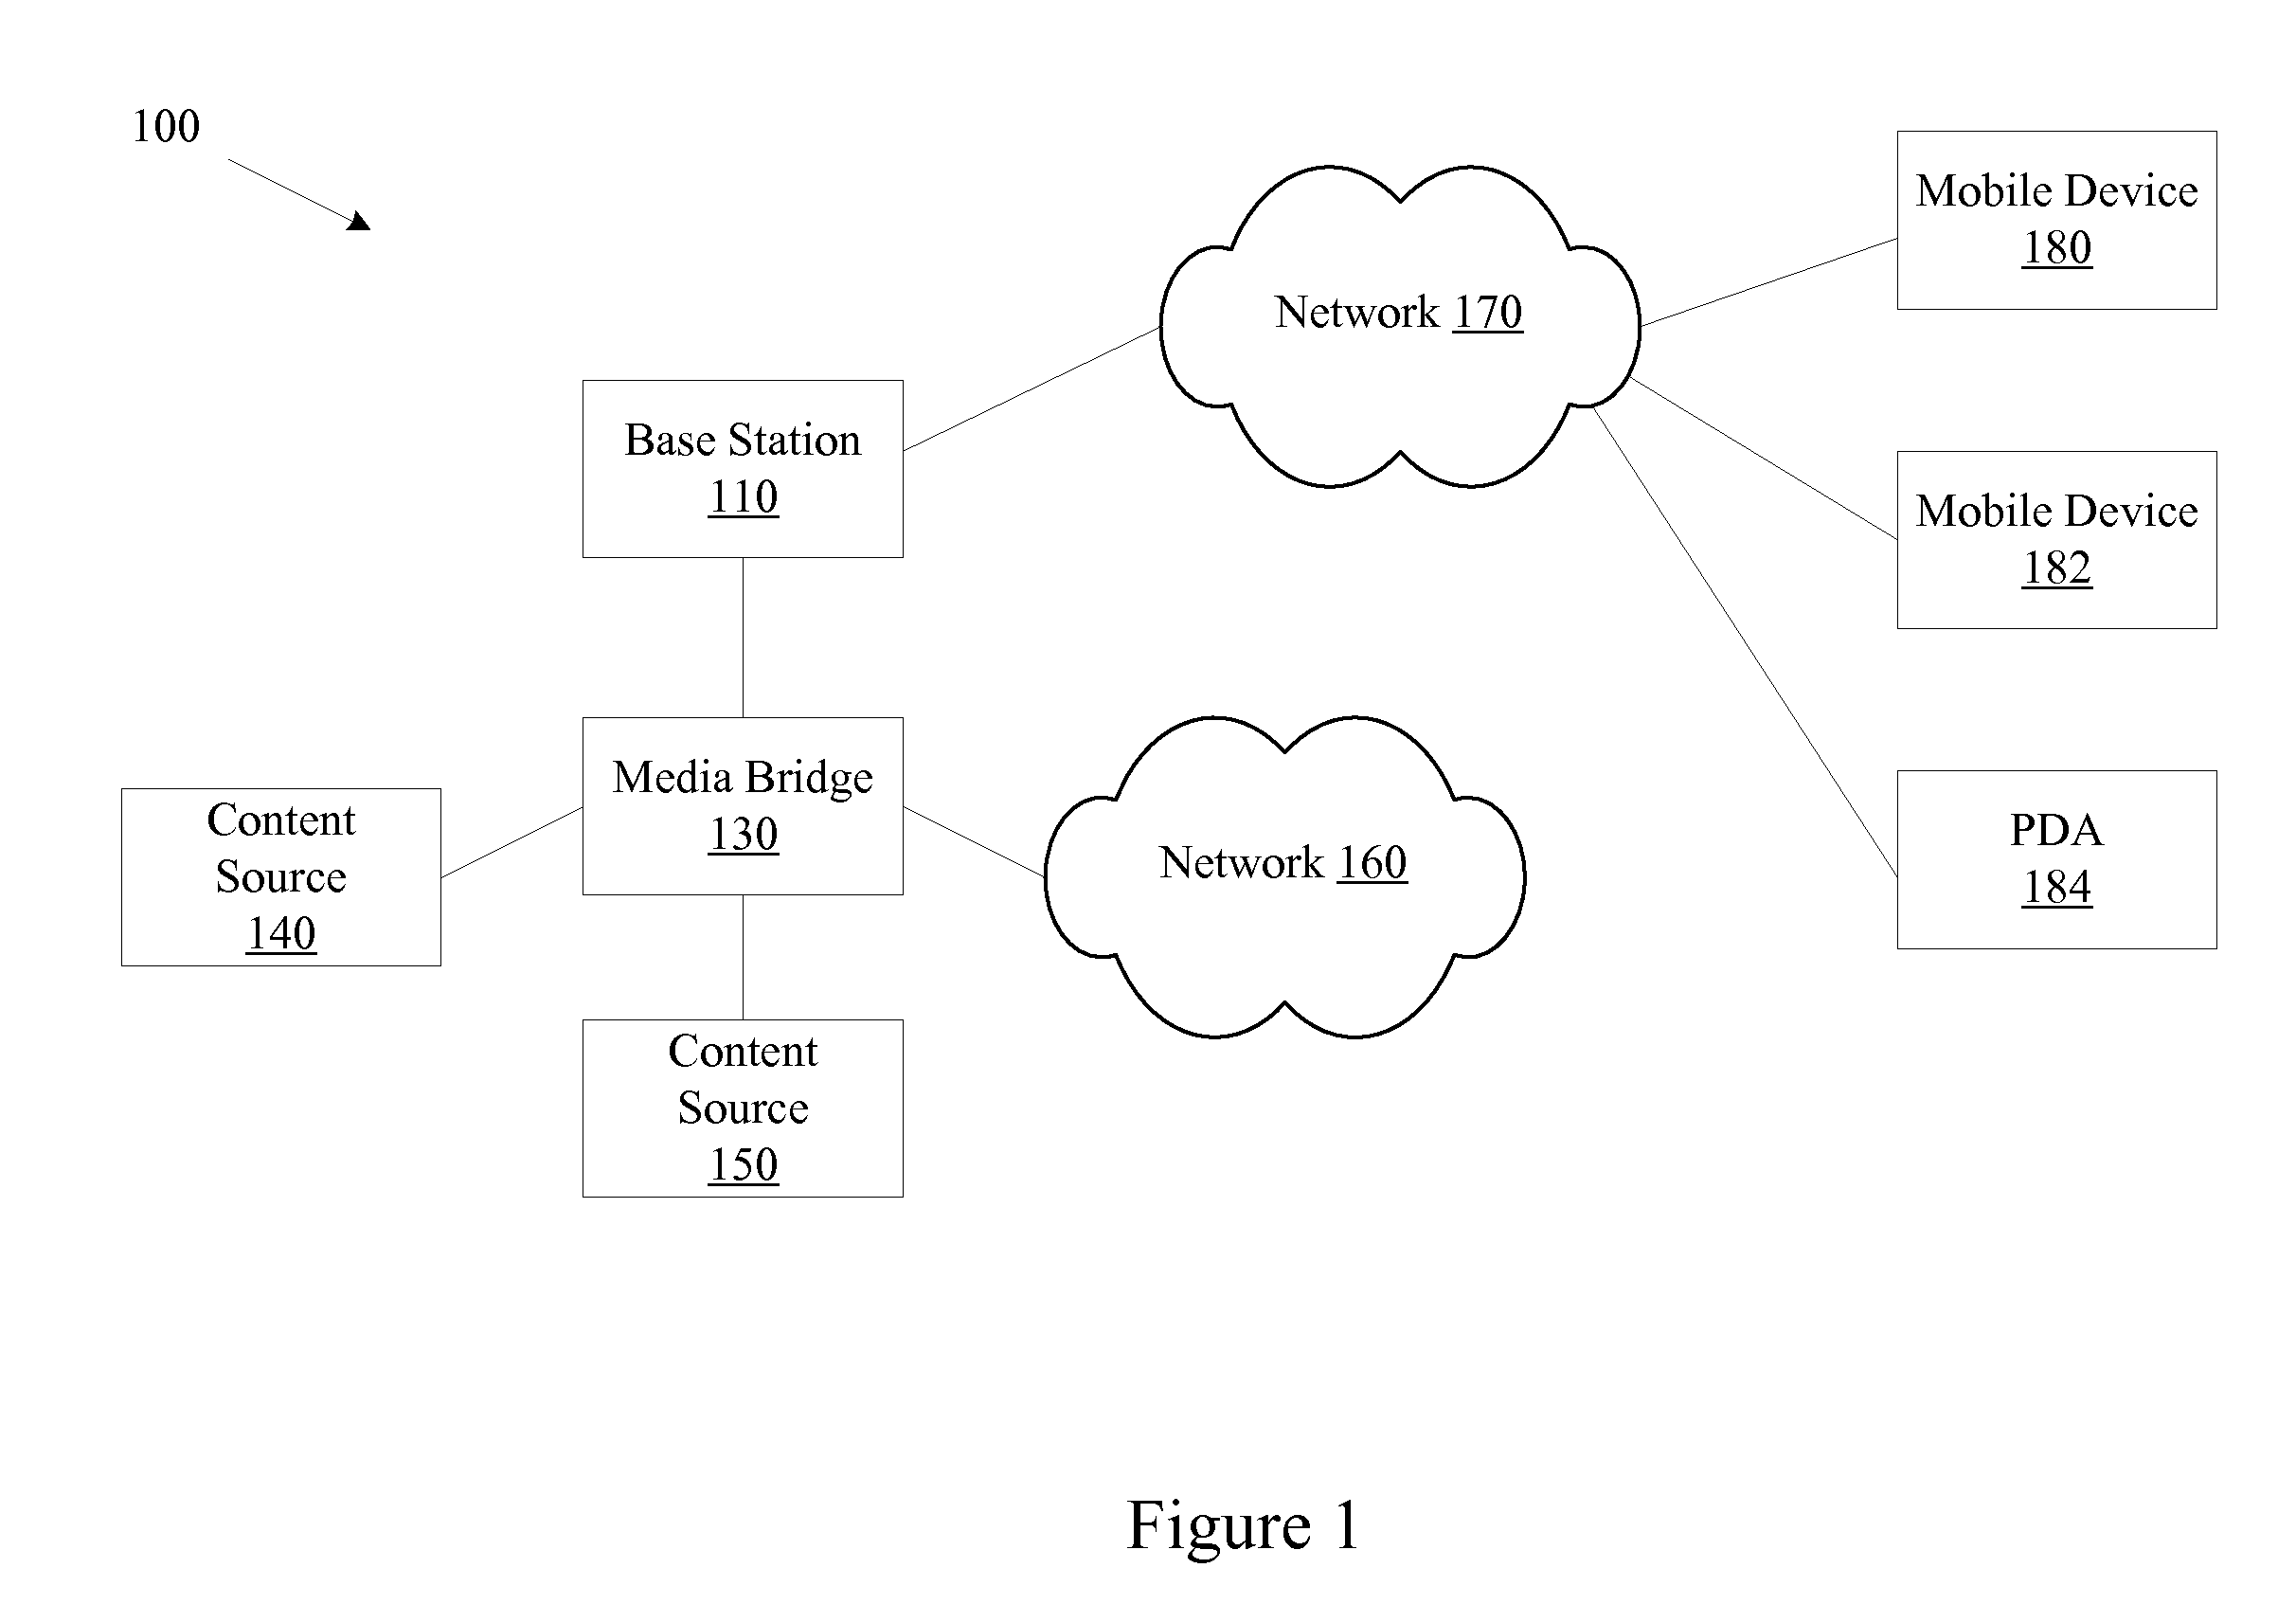 Providing Devices With Command Functionality in Content Streams